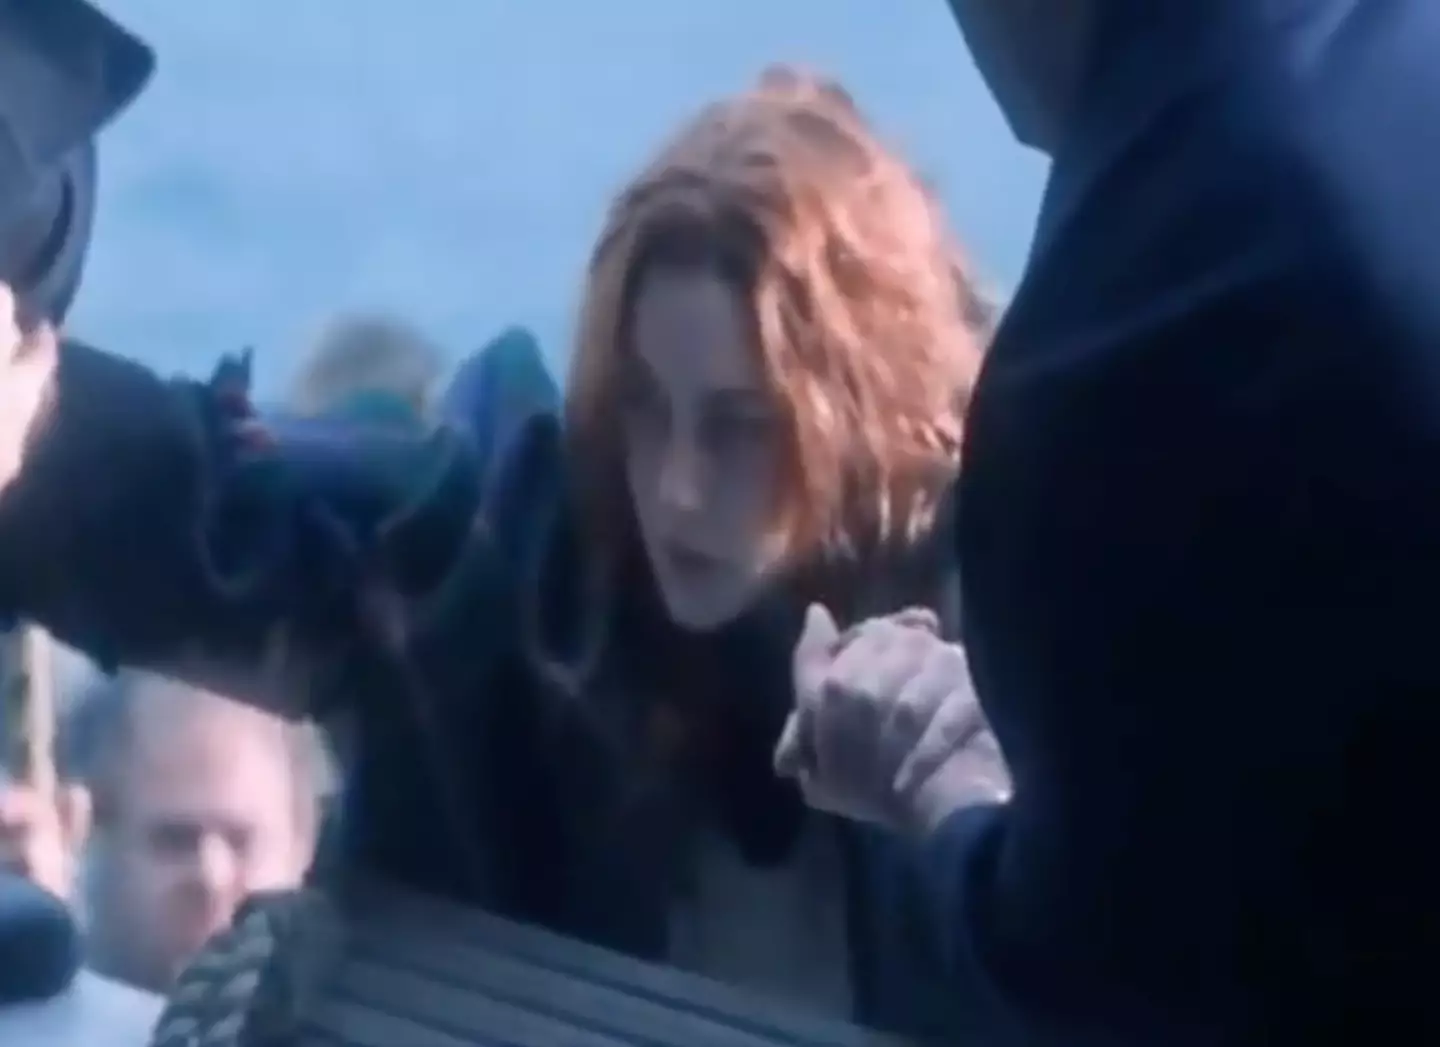 The deleted scene takes place after the sinking.